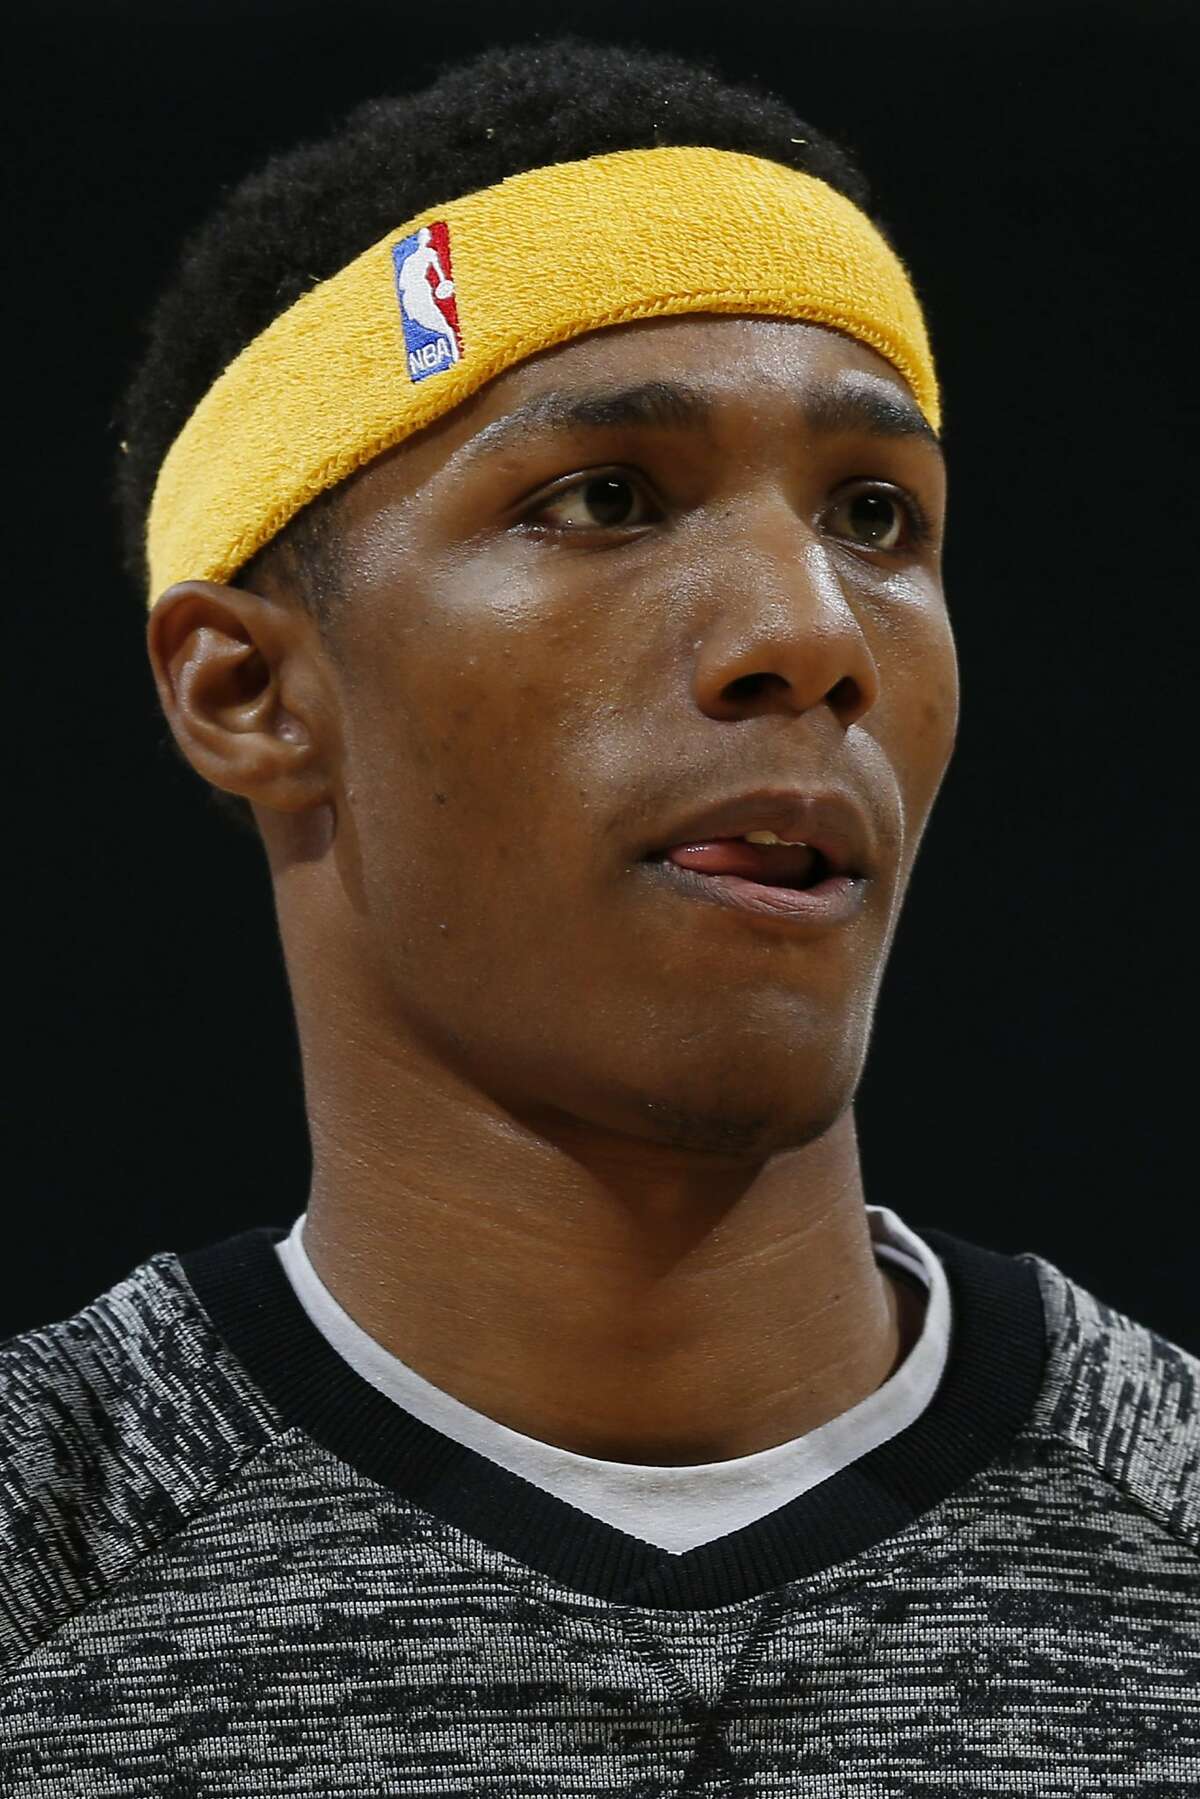 This a headshot of basketball player Patrick McCaw. Patrick McCaw is an active basketball player for the Golden State Warriors as of Oct. 25, 2016 in the NBA.